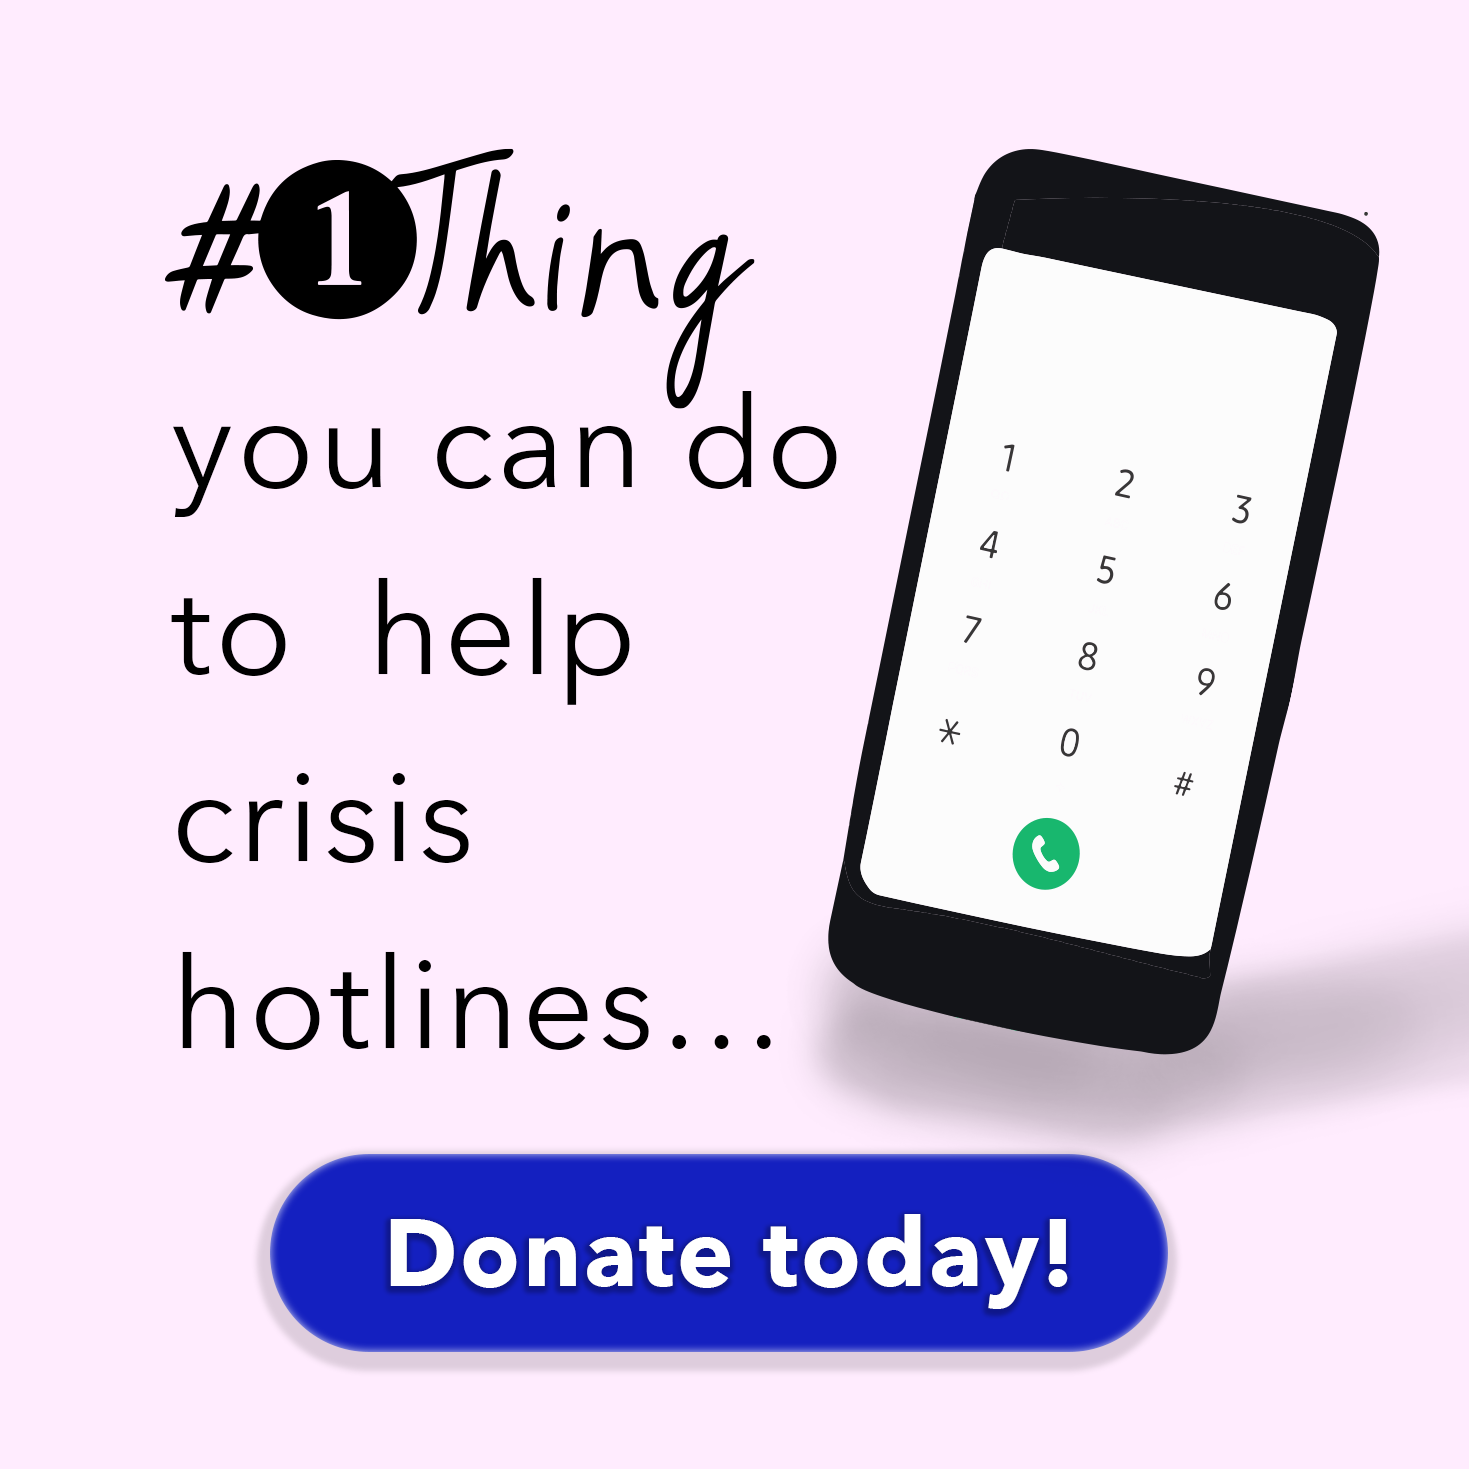 #1Thing you can do is help crisis hotlines...